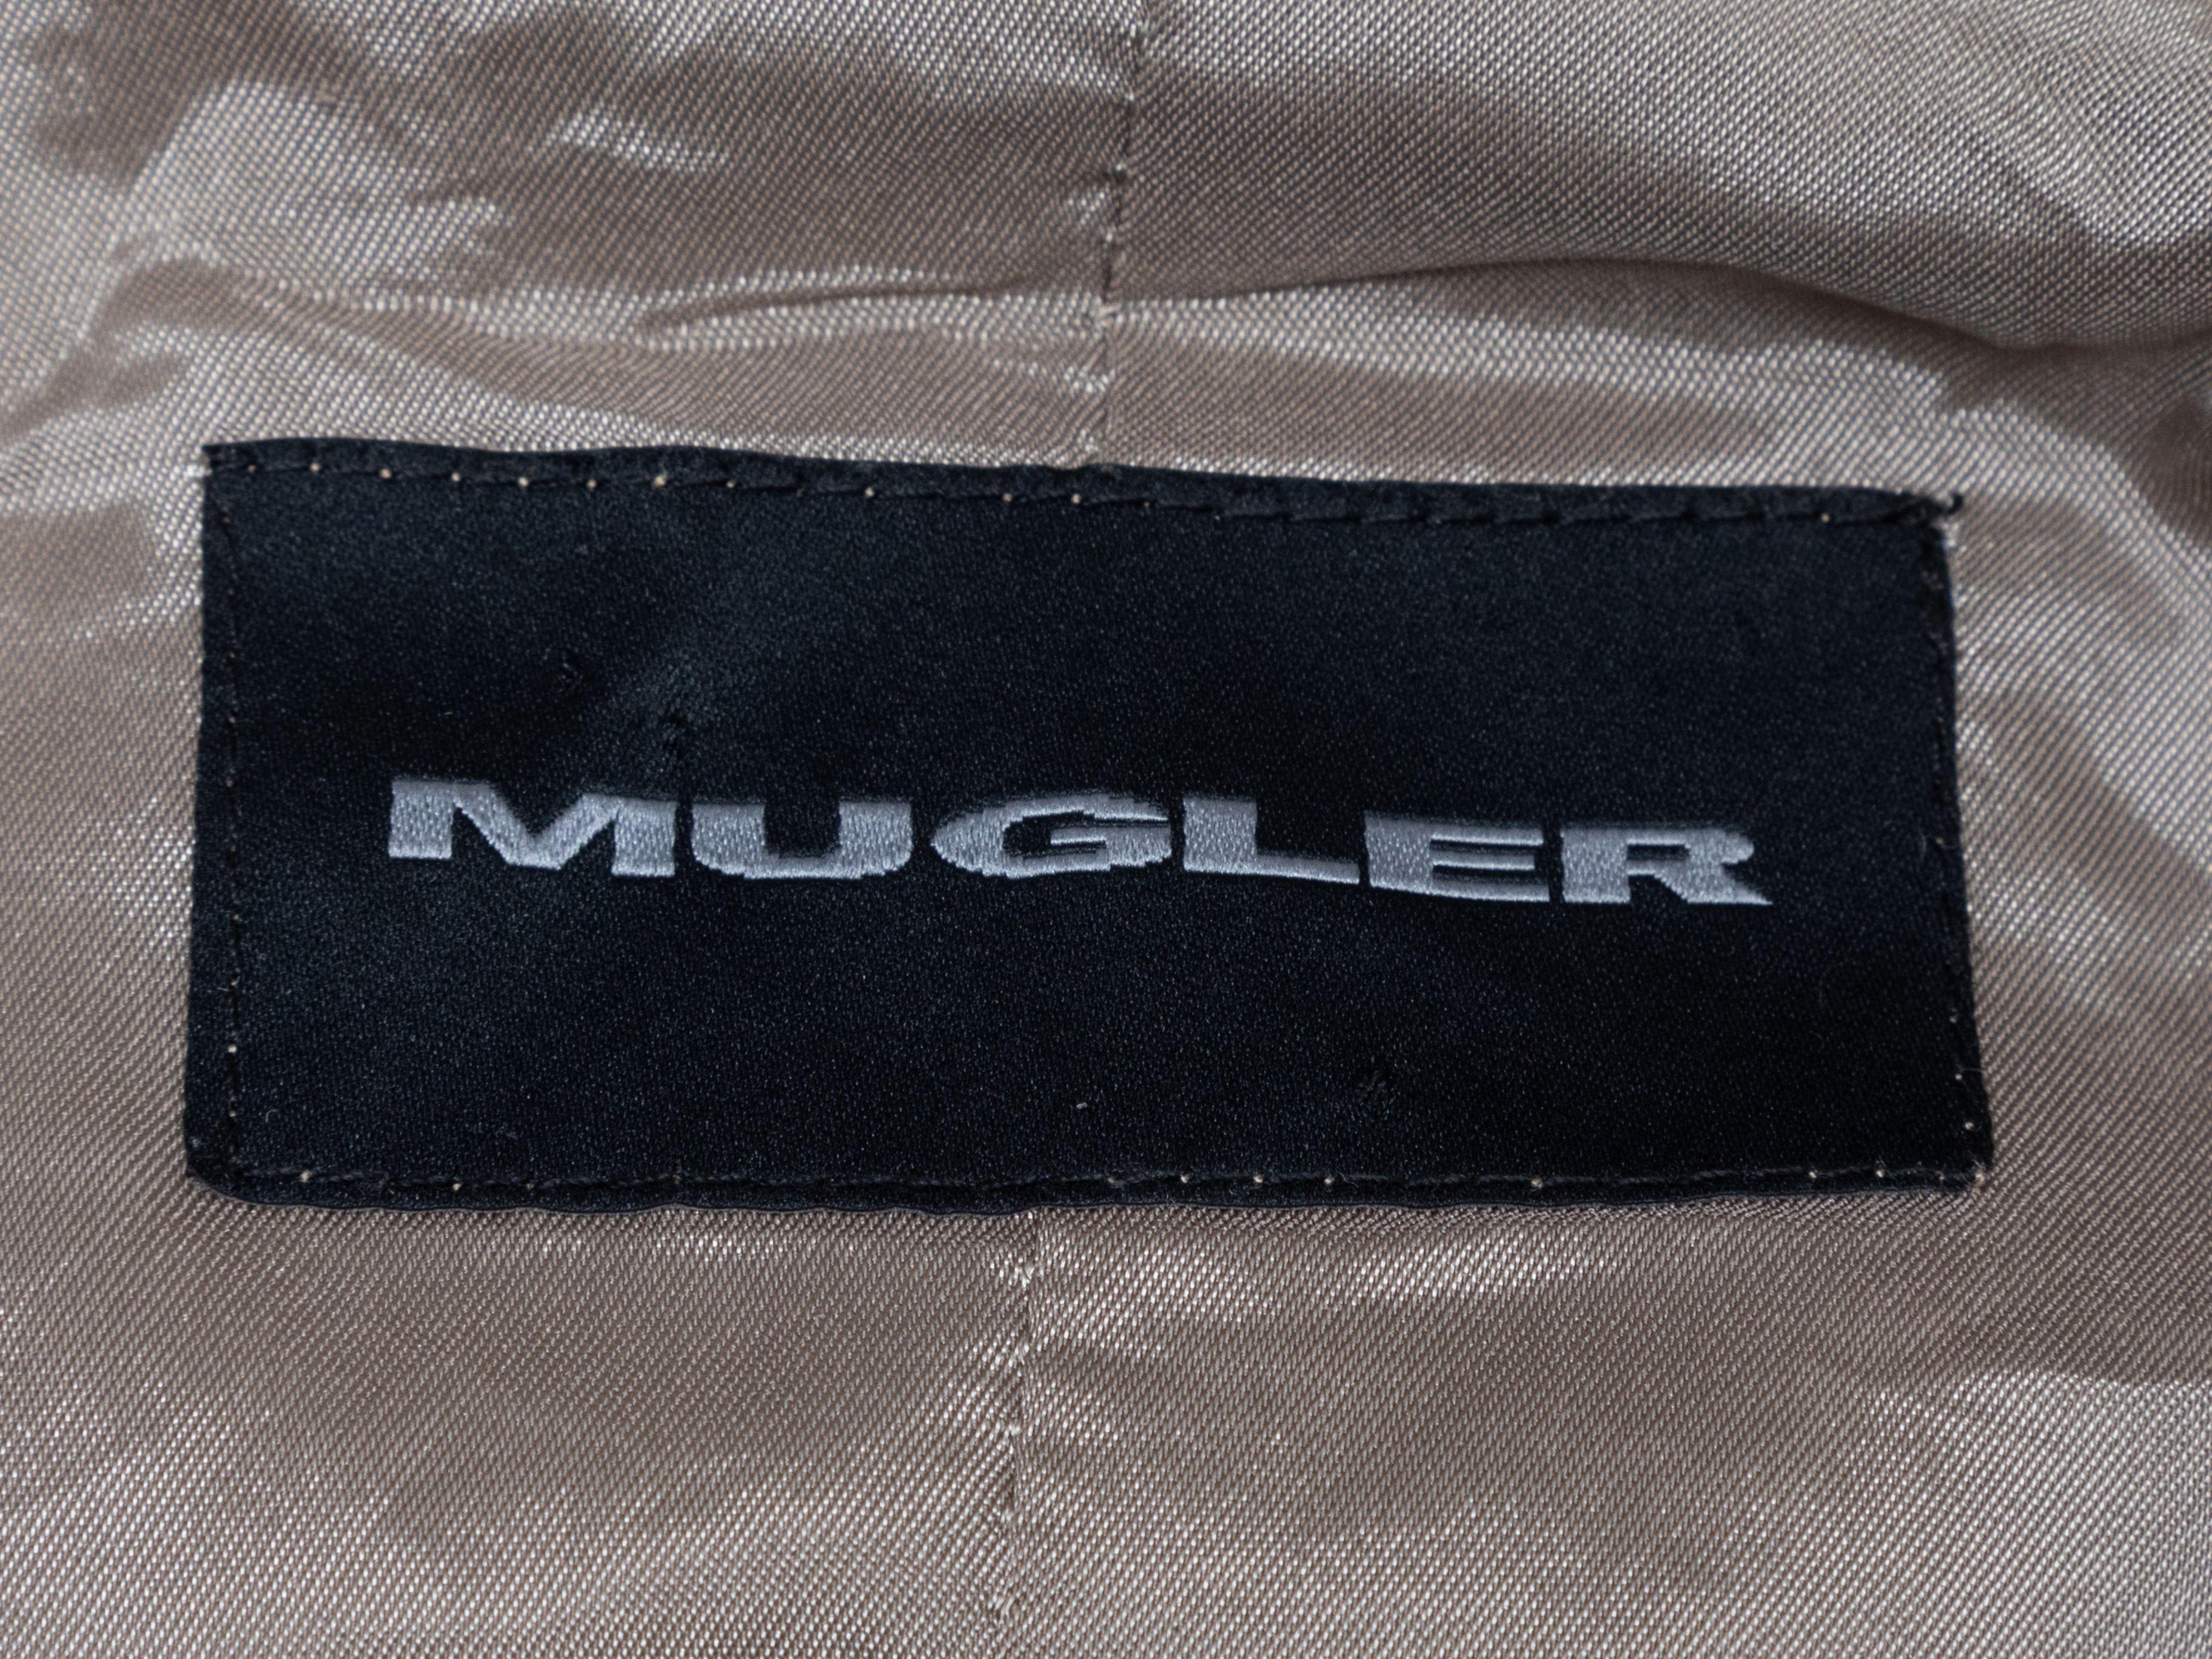 Product Details: Vintage silver nylon jacket by Mugler. Stand collar. Snap accents. Zip closure at center front. 40